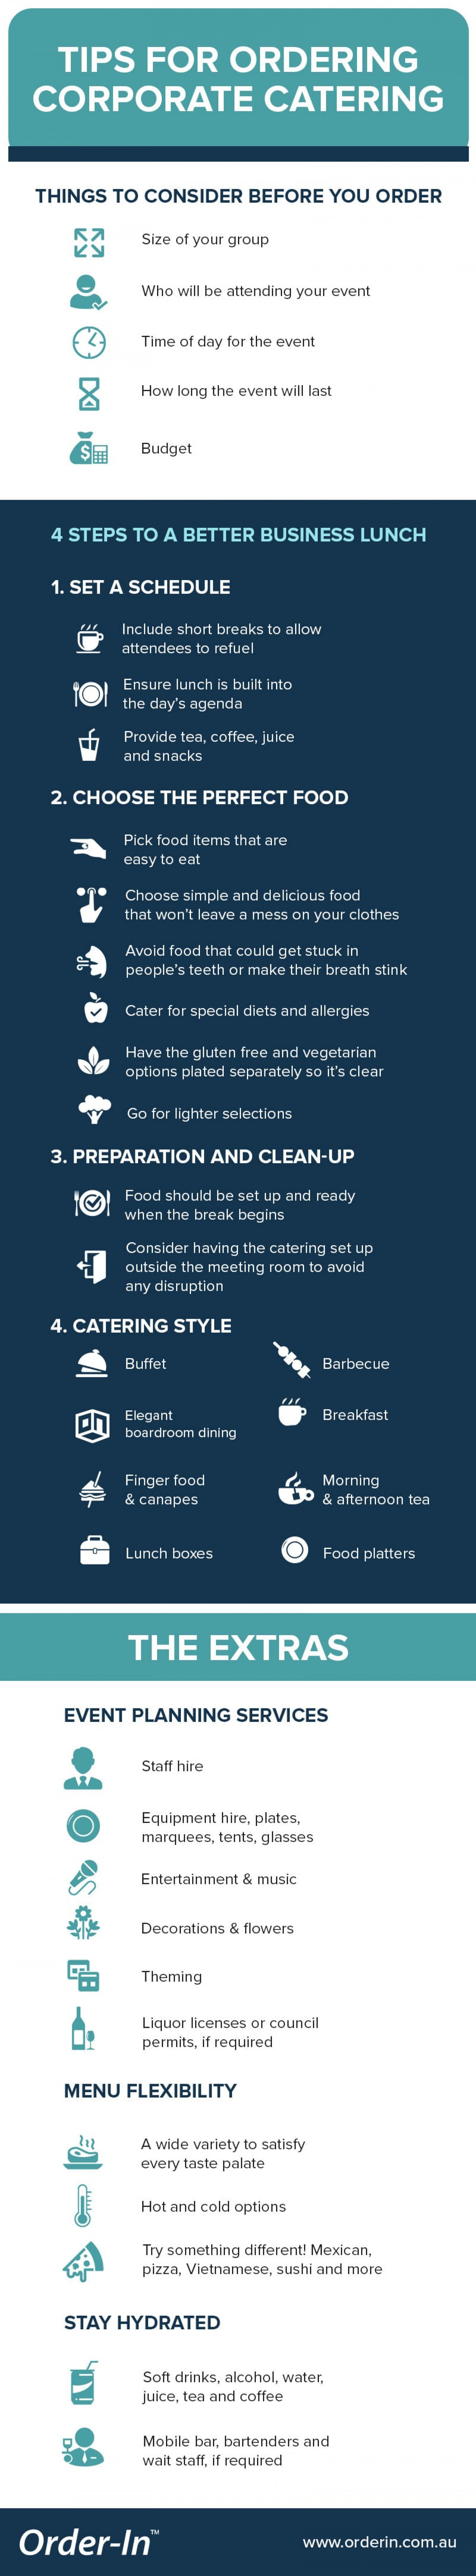 Top tips for ordering corporate catering  Infographic